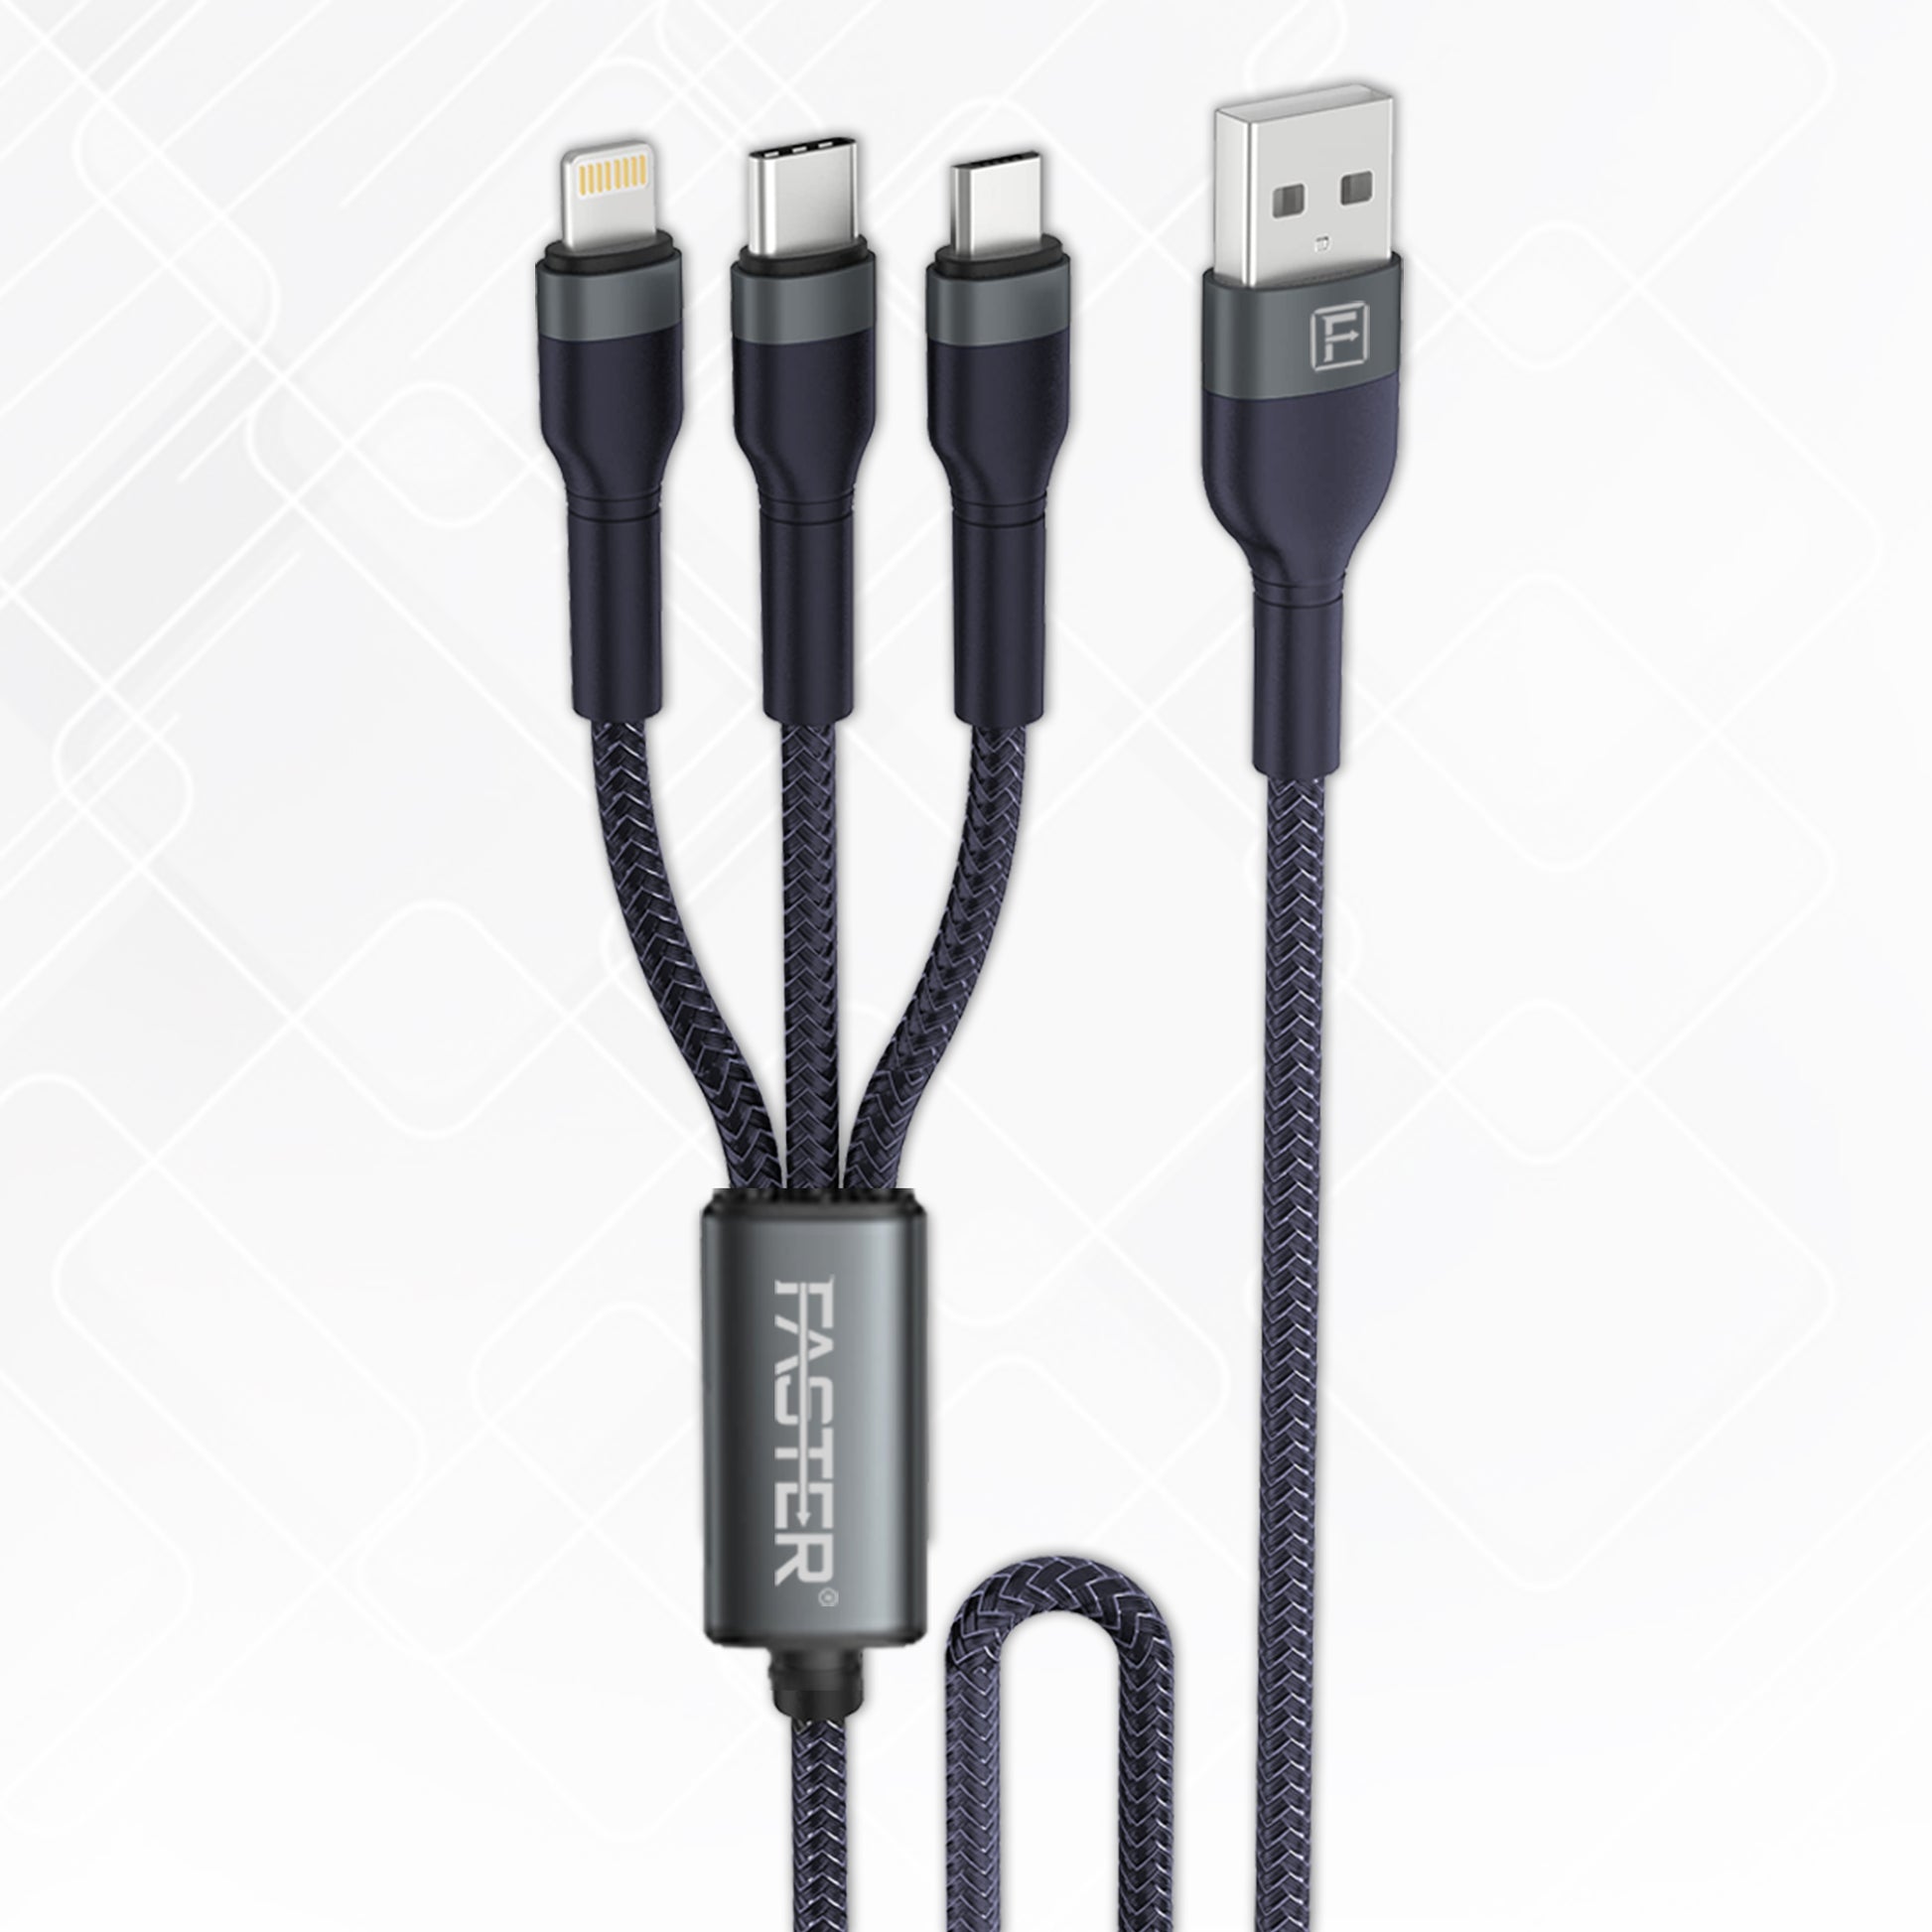 Faster D4 Quick Charge Denim Braided 3-in-1 Data Cable Price in Pakistan